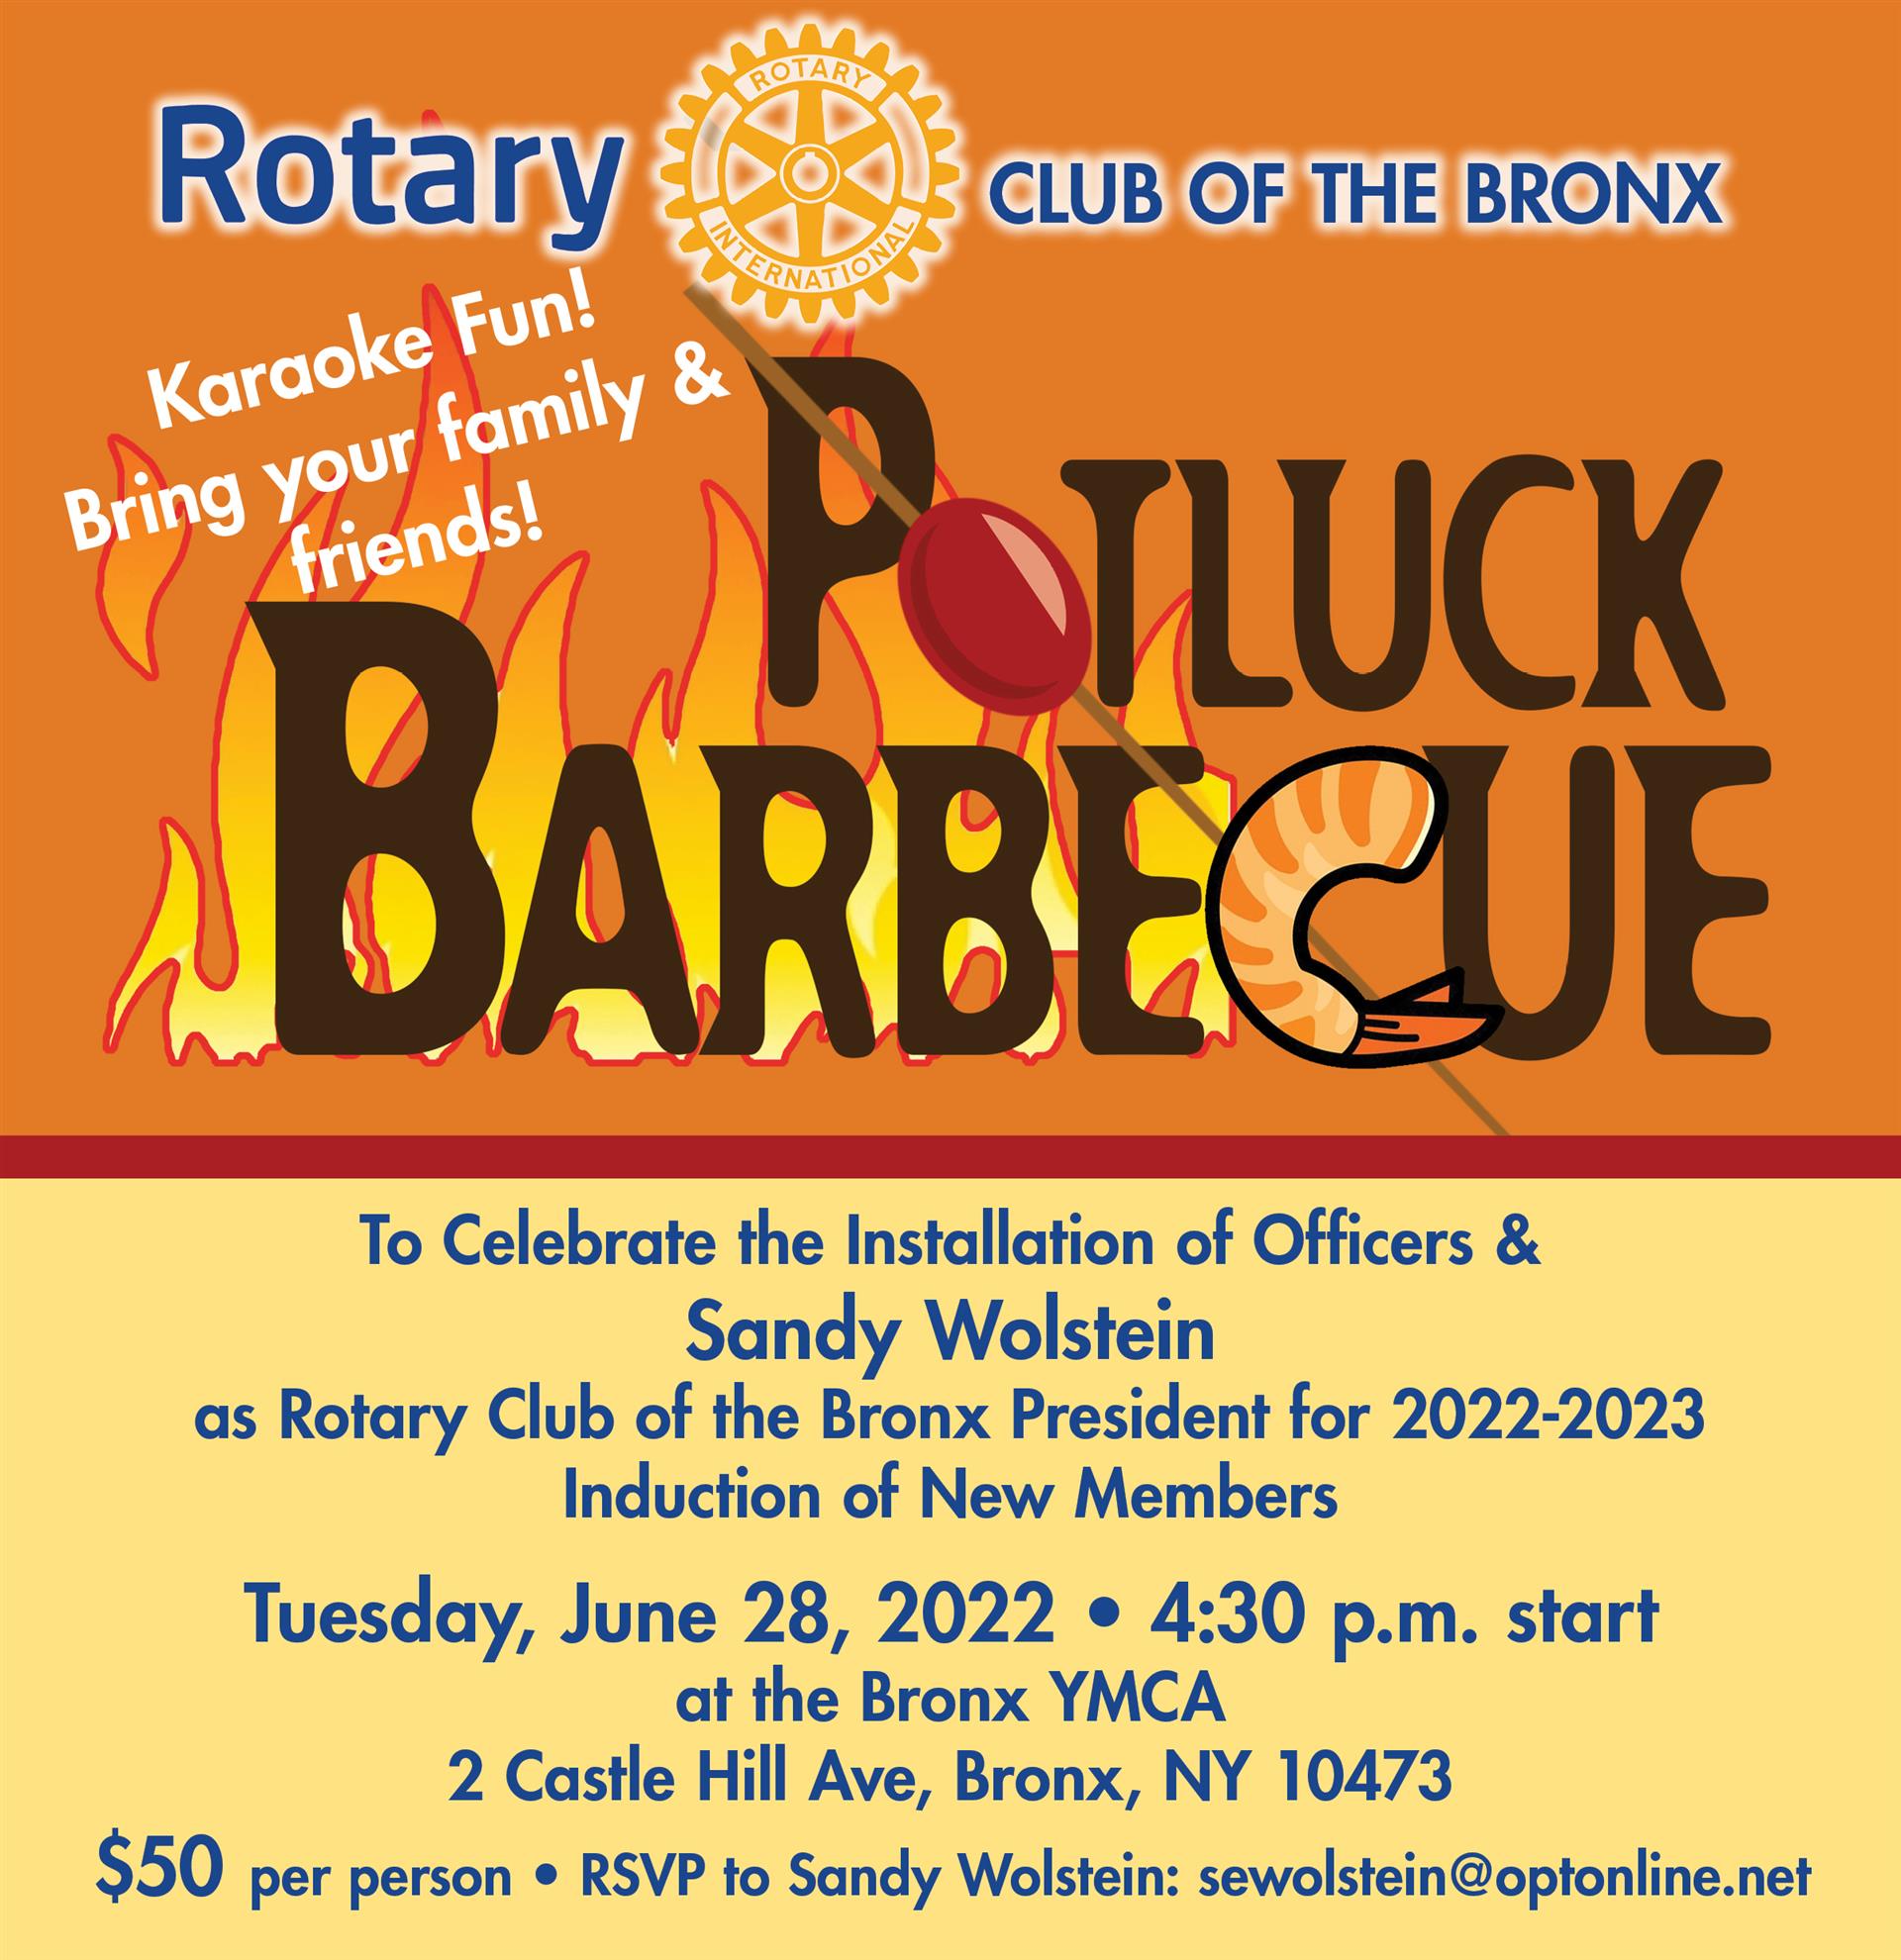 Potluck Barbecue On June 26 tfor Installation of Sandy Wolstein as President opf Bronx Rotary